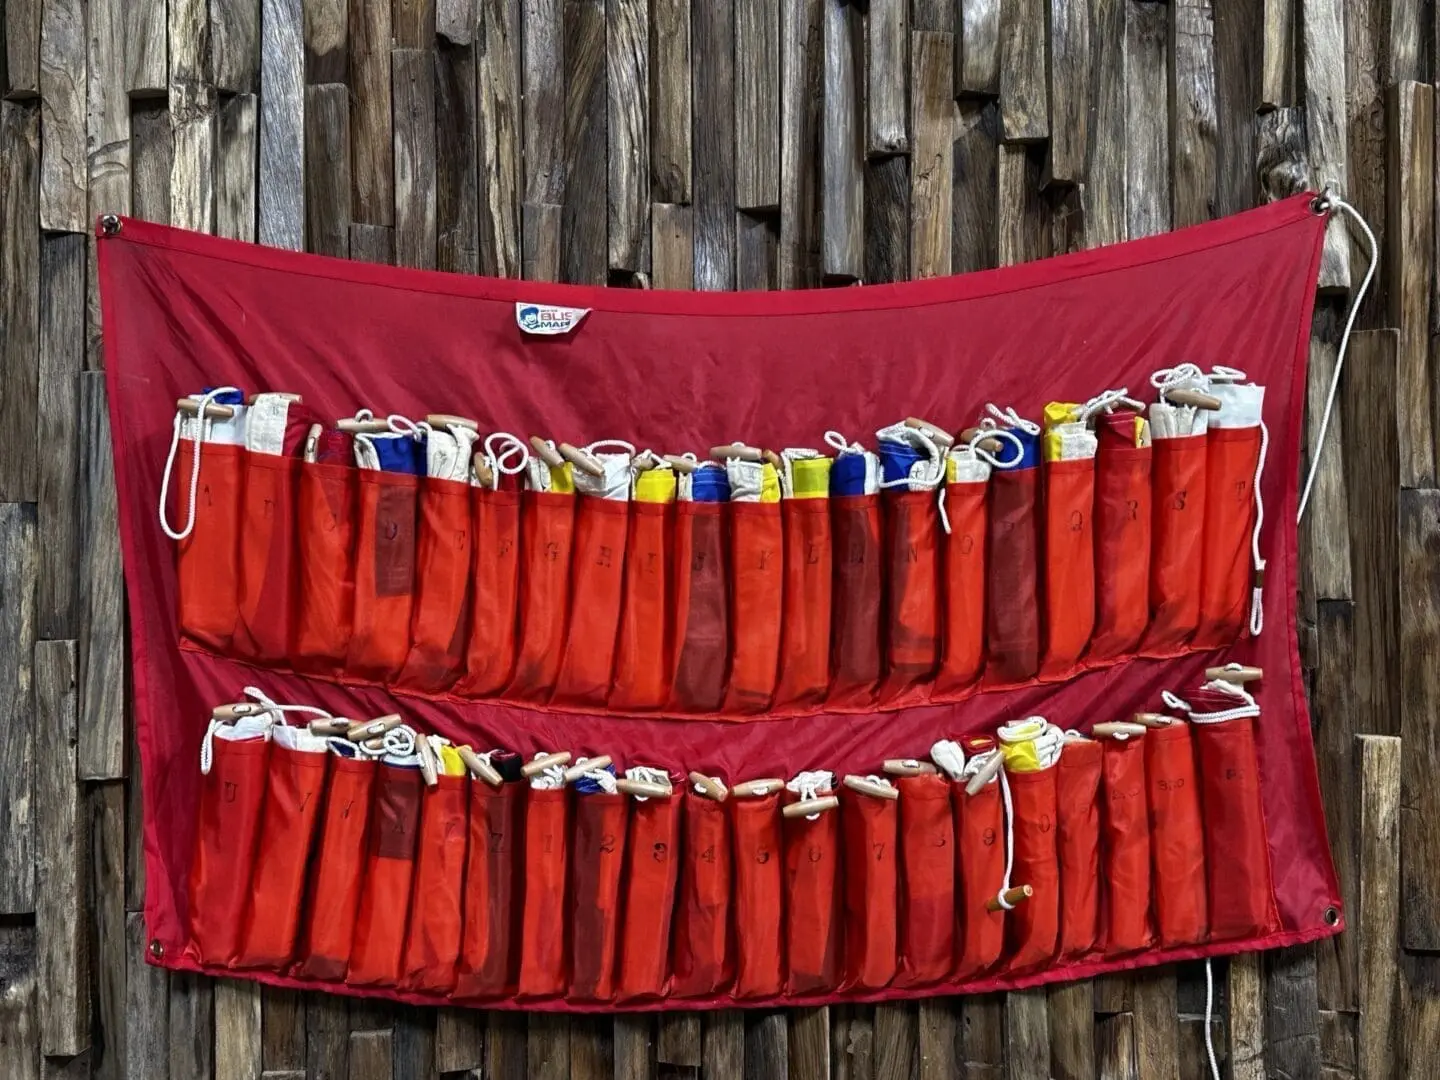 A red bag hanging on the wall of a wooden building.